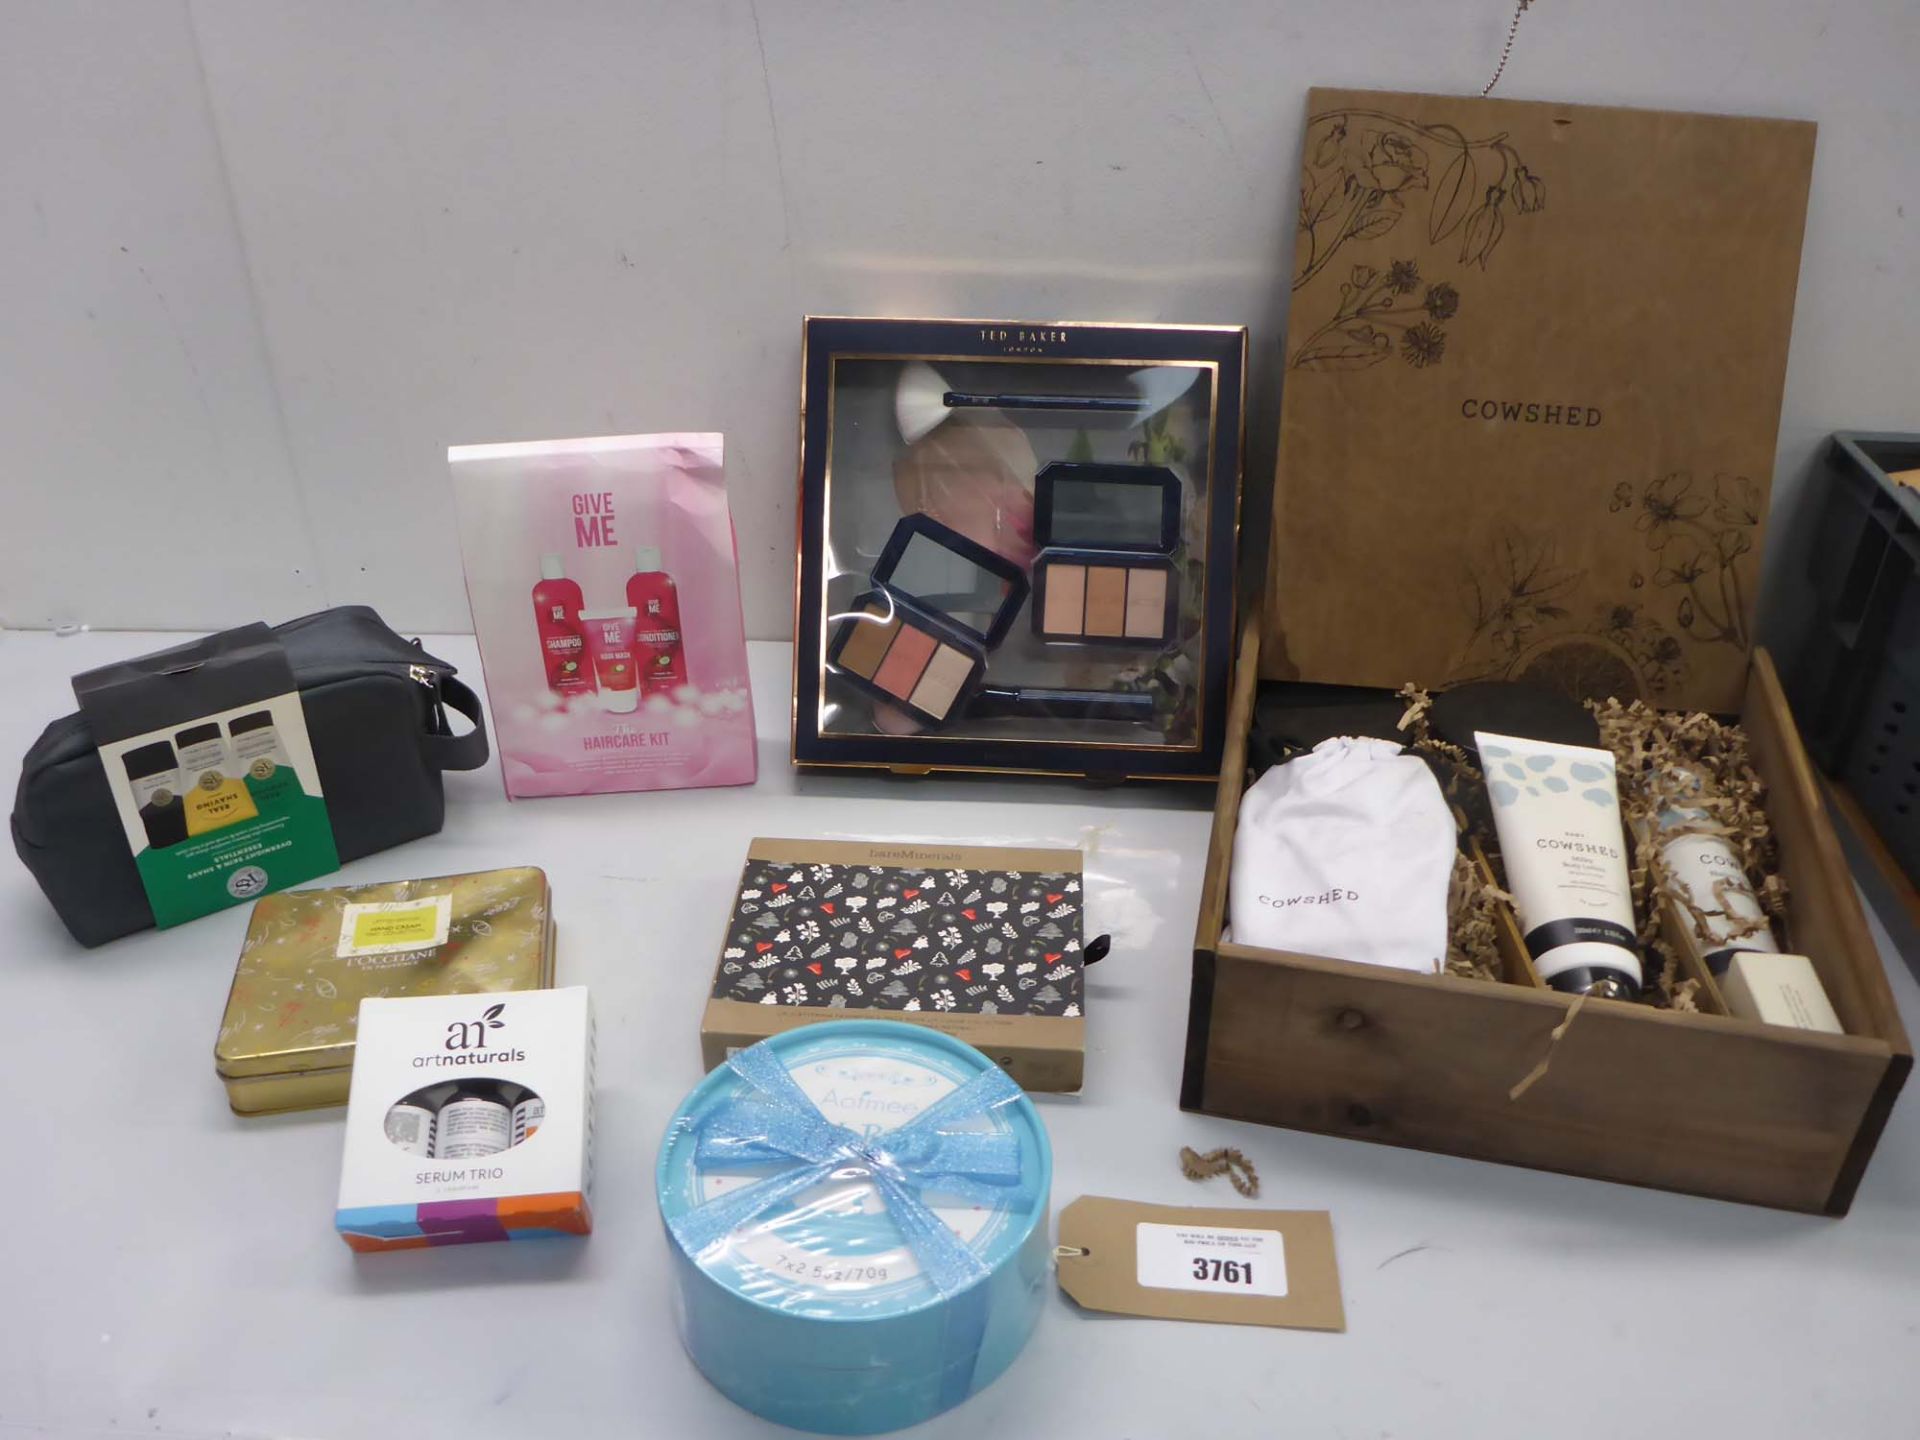 8 gift box toiletry & cosmetic sets including Cowshed, Ted Baker, bareMinerals etc